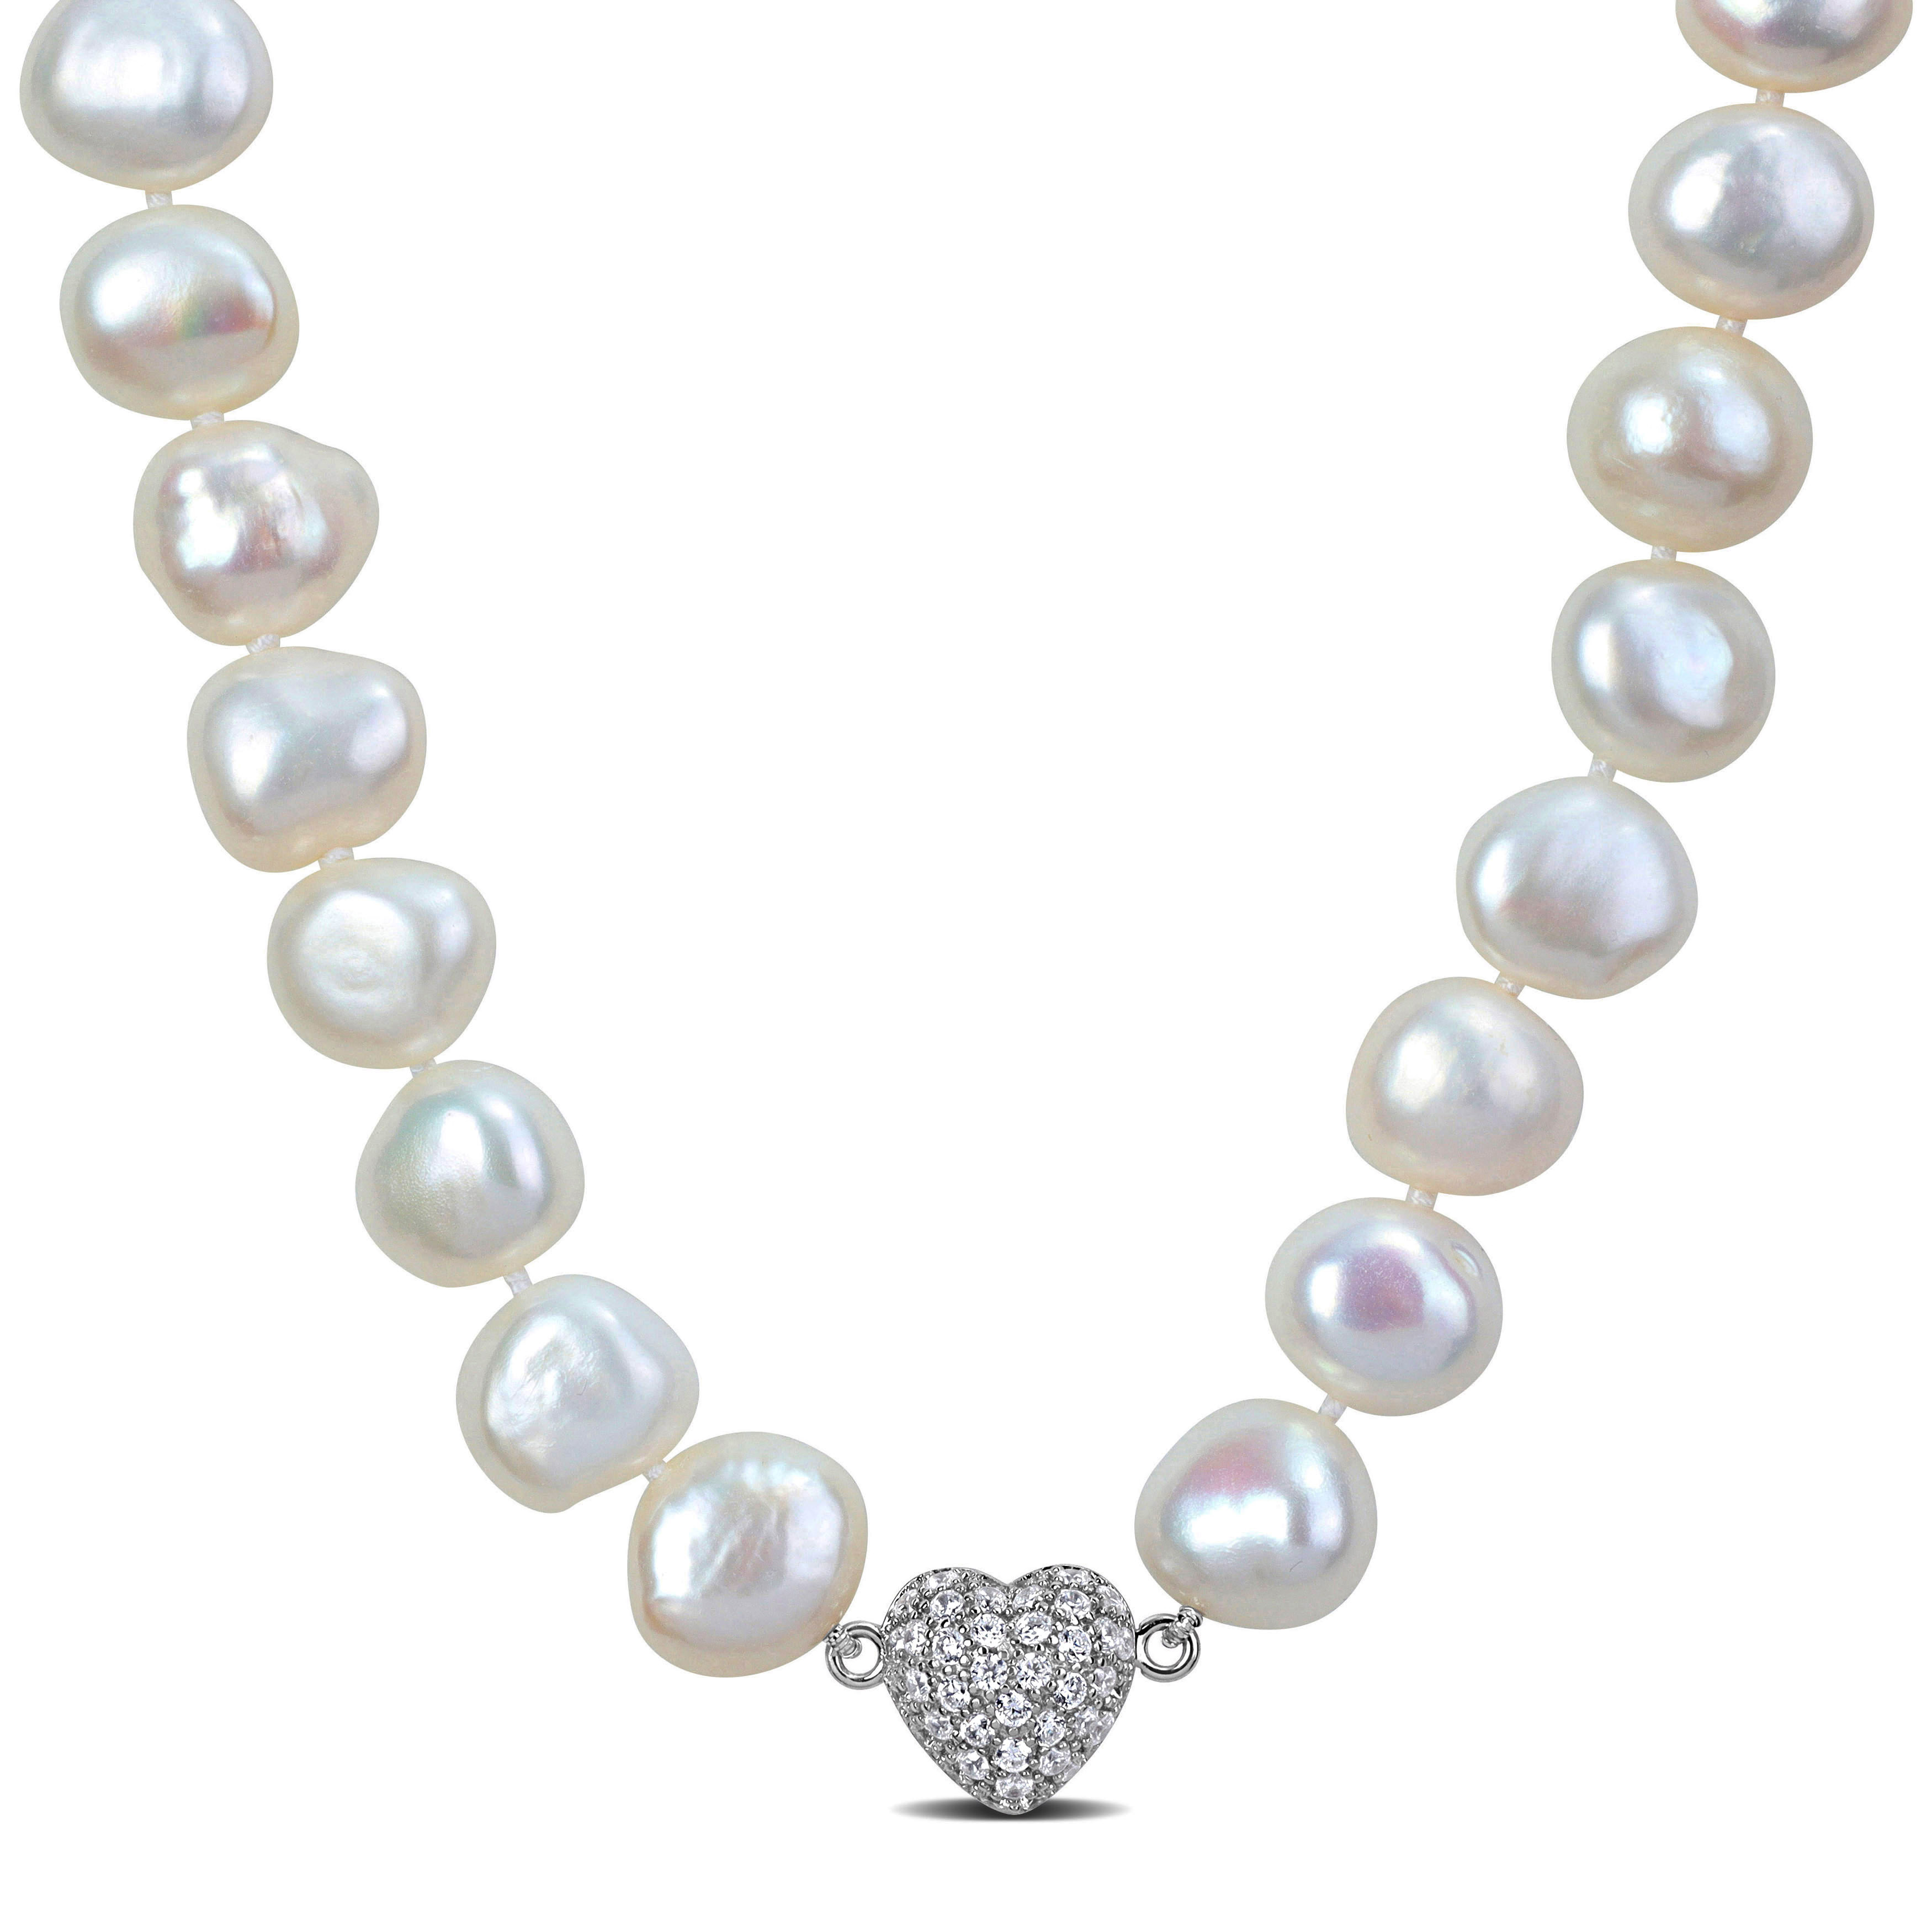 11-12 MM Cultured Freshwater Pearl Strand & Heart-Shape Cubic Zirconia  Necklace - 20 in. - CBG003317